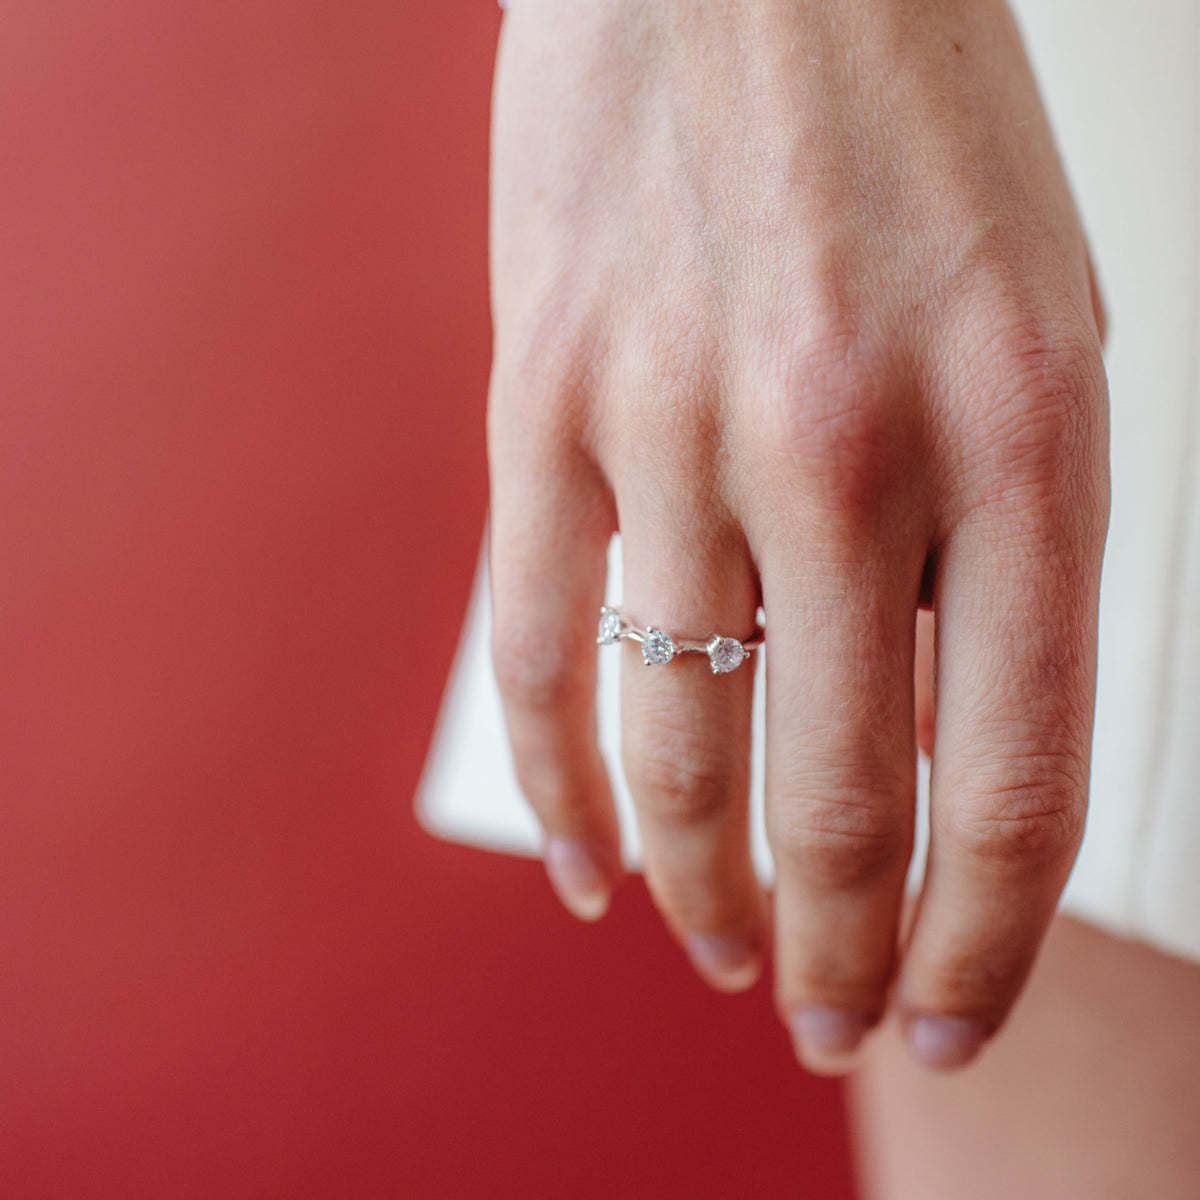 SCATTERED LOVE RING - CUBIC ZIRCONIA &amp; SILVER - SO PRETTY CARA COTTER